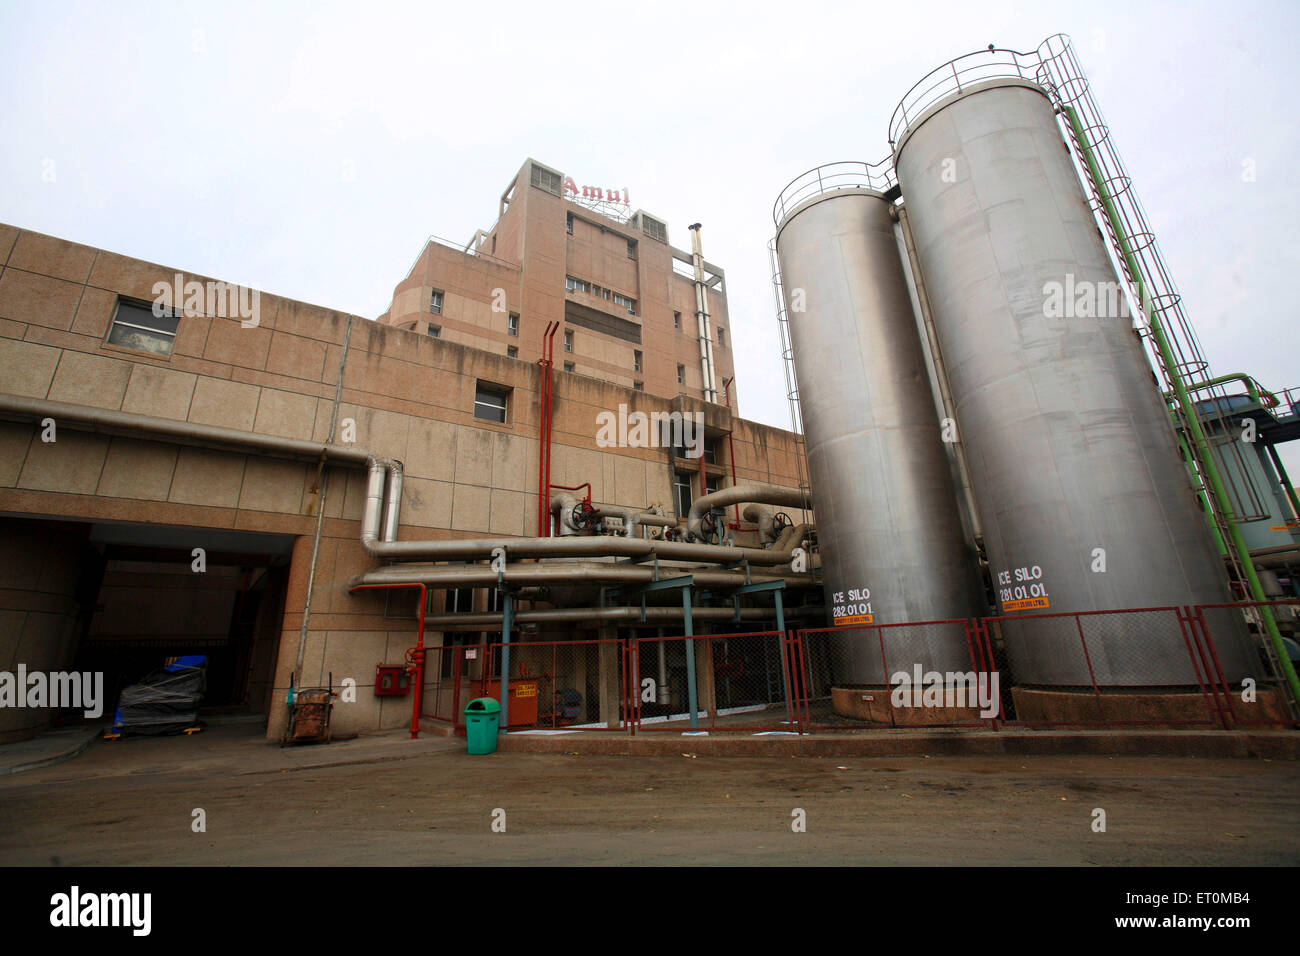 Large tanks and exterior view of Amul factory in Anand ; Gujarat ; India Stock Photo